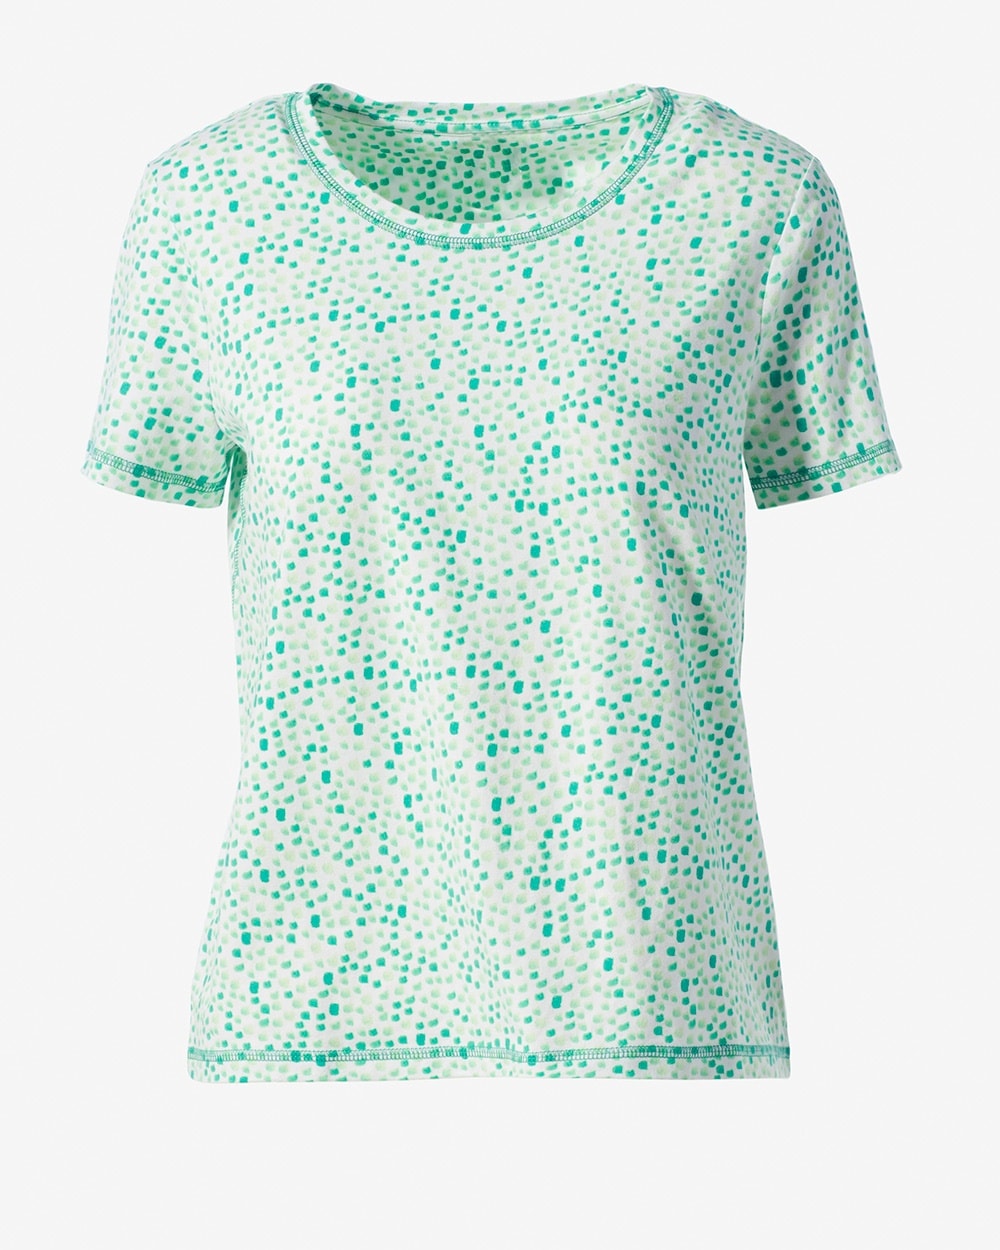 Chilled Dots Scoopneck Tee